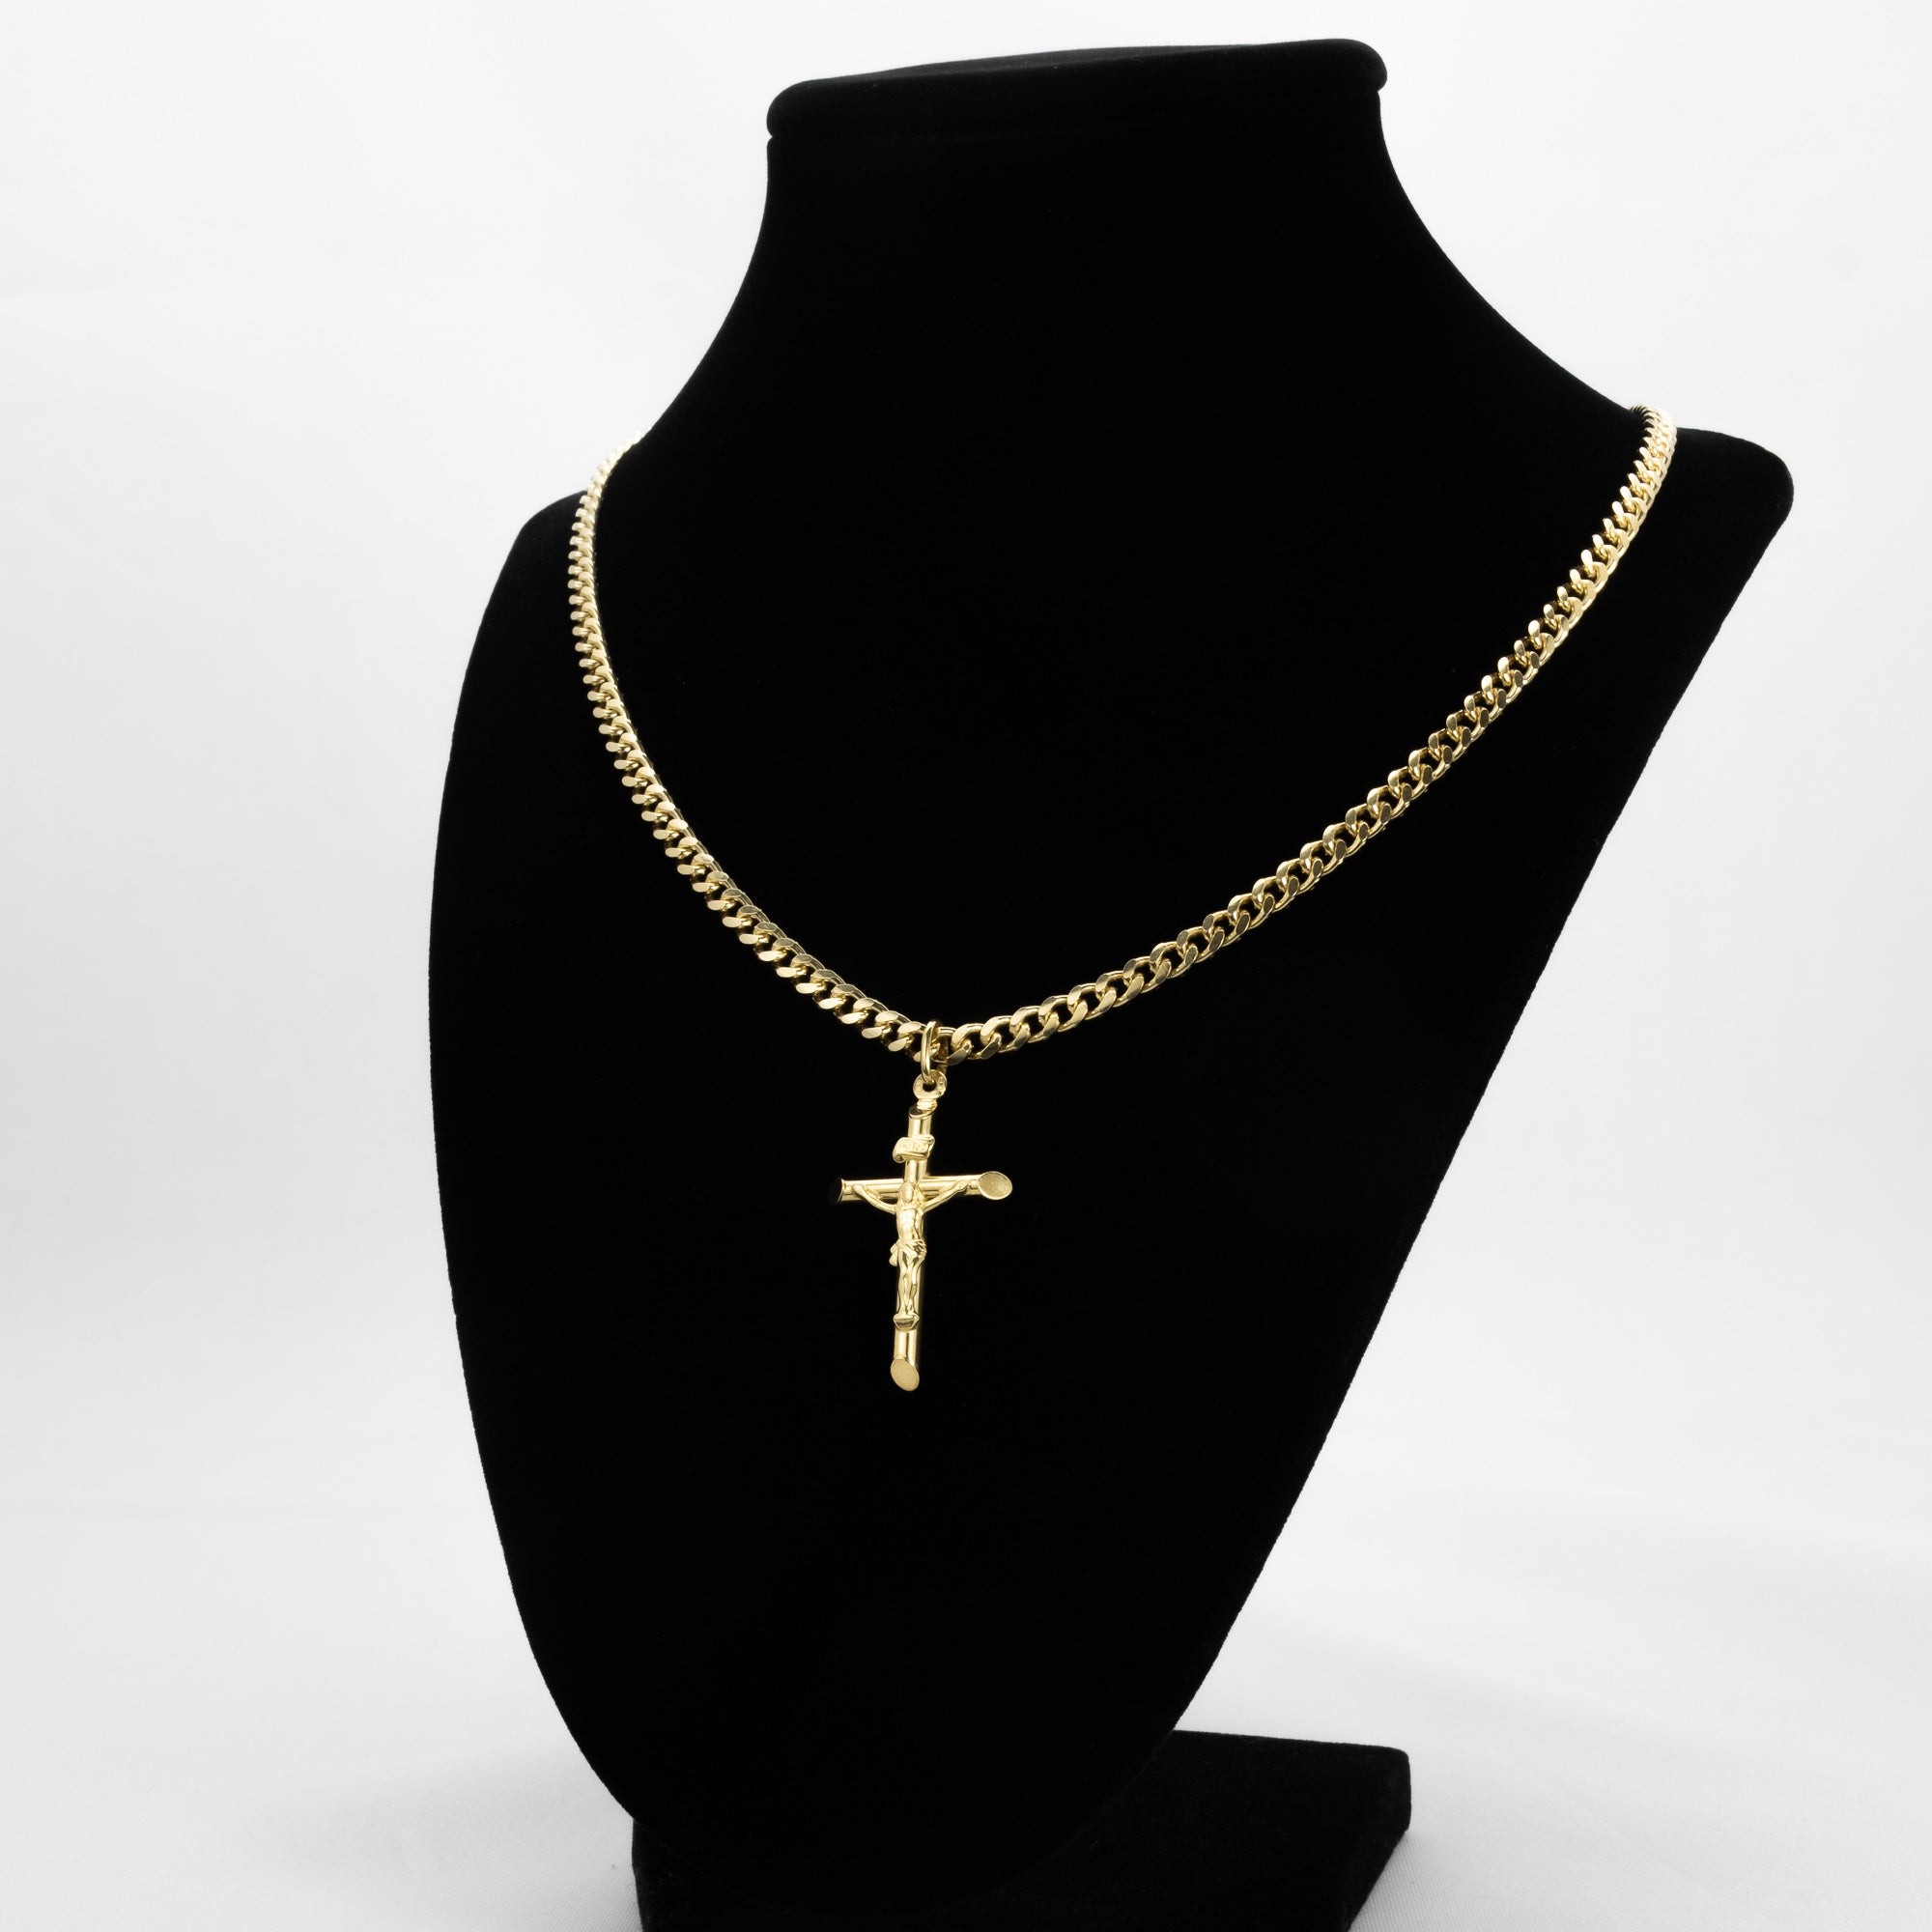 Lot - Italian 18ct gold curb link necklace with 18ct gold cross crucifix  pendant, 42 grams